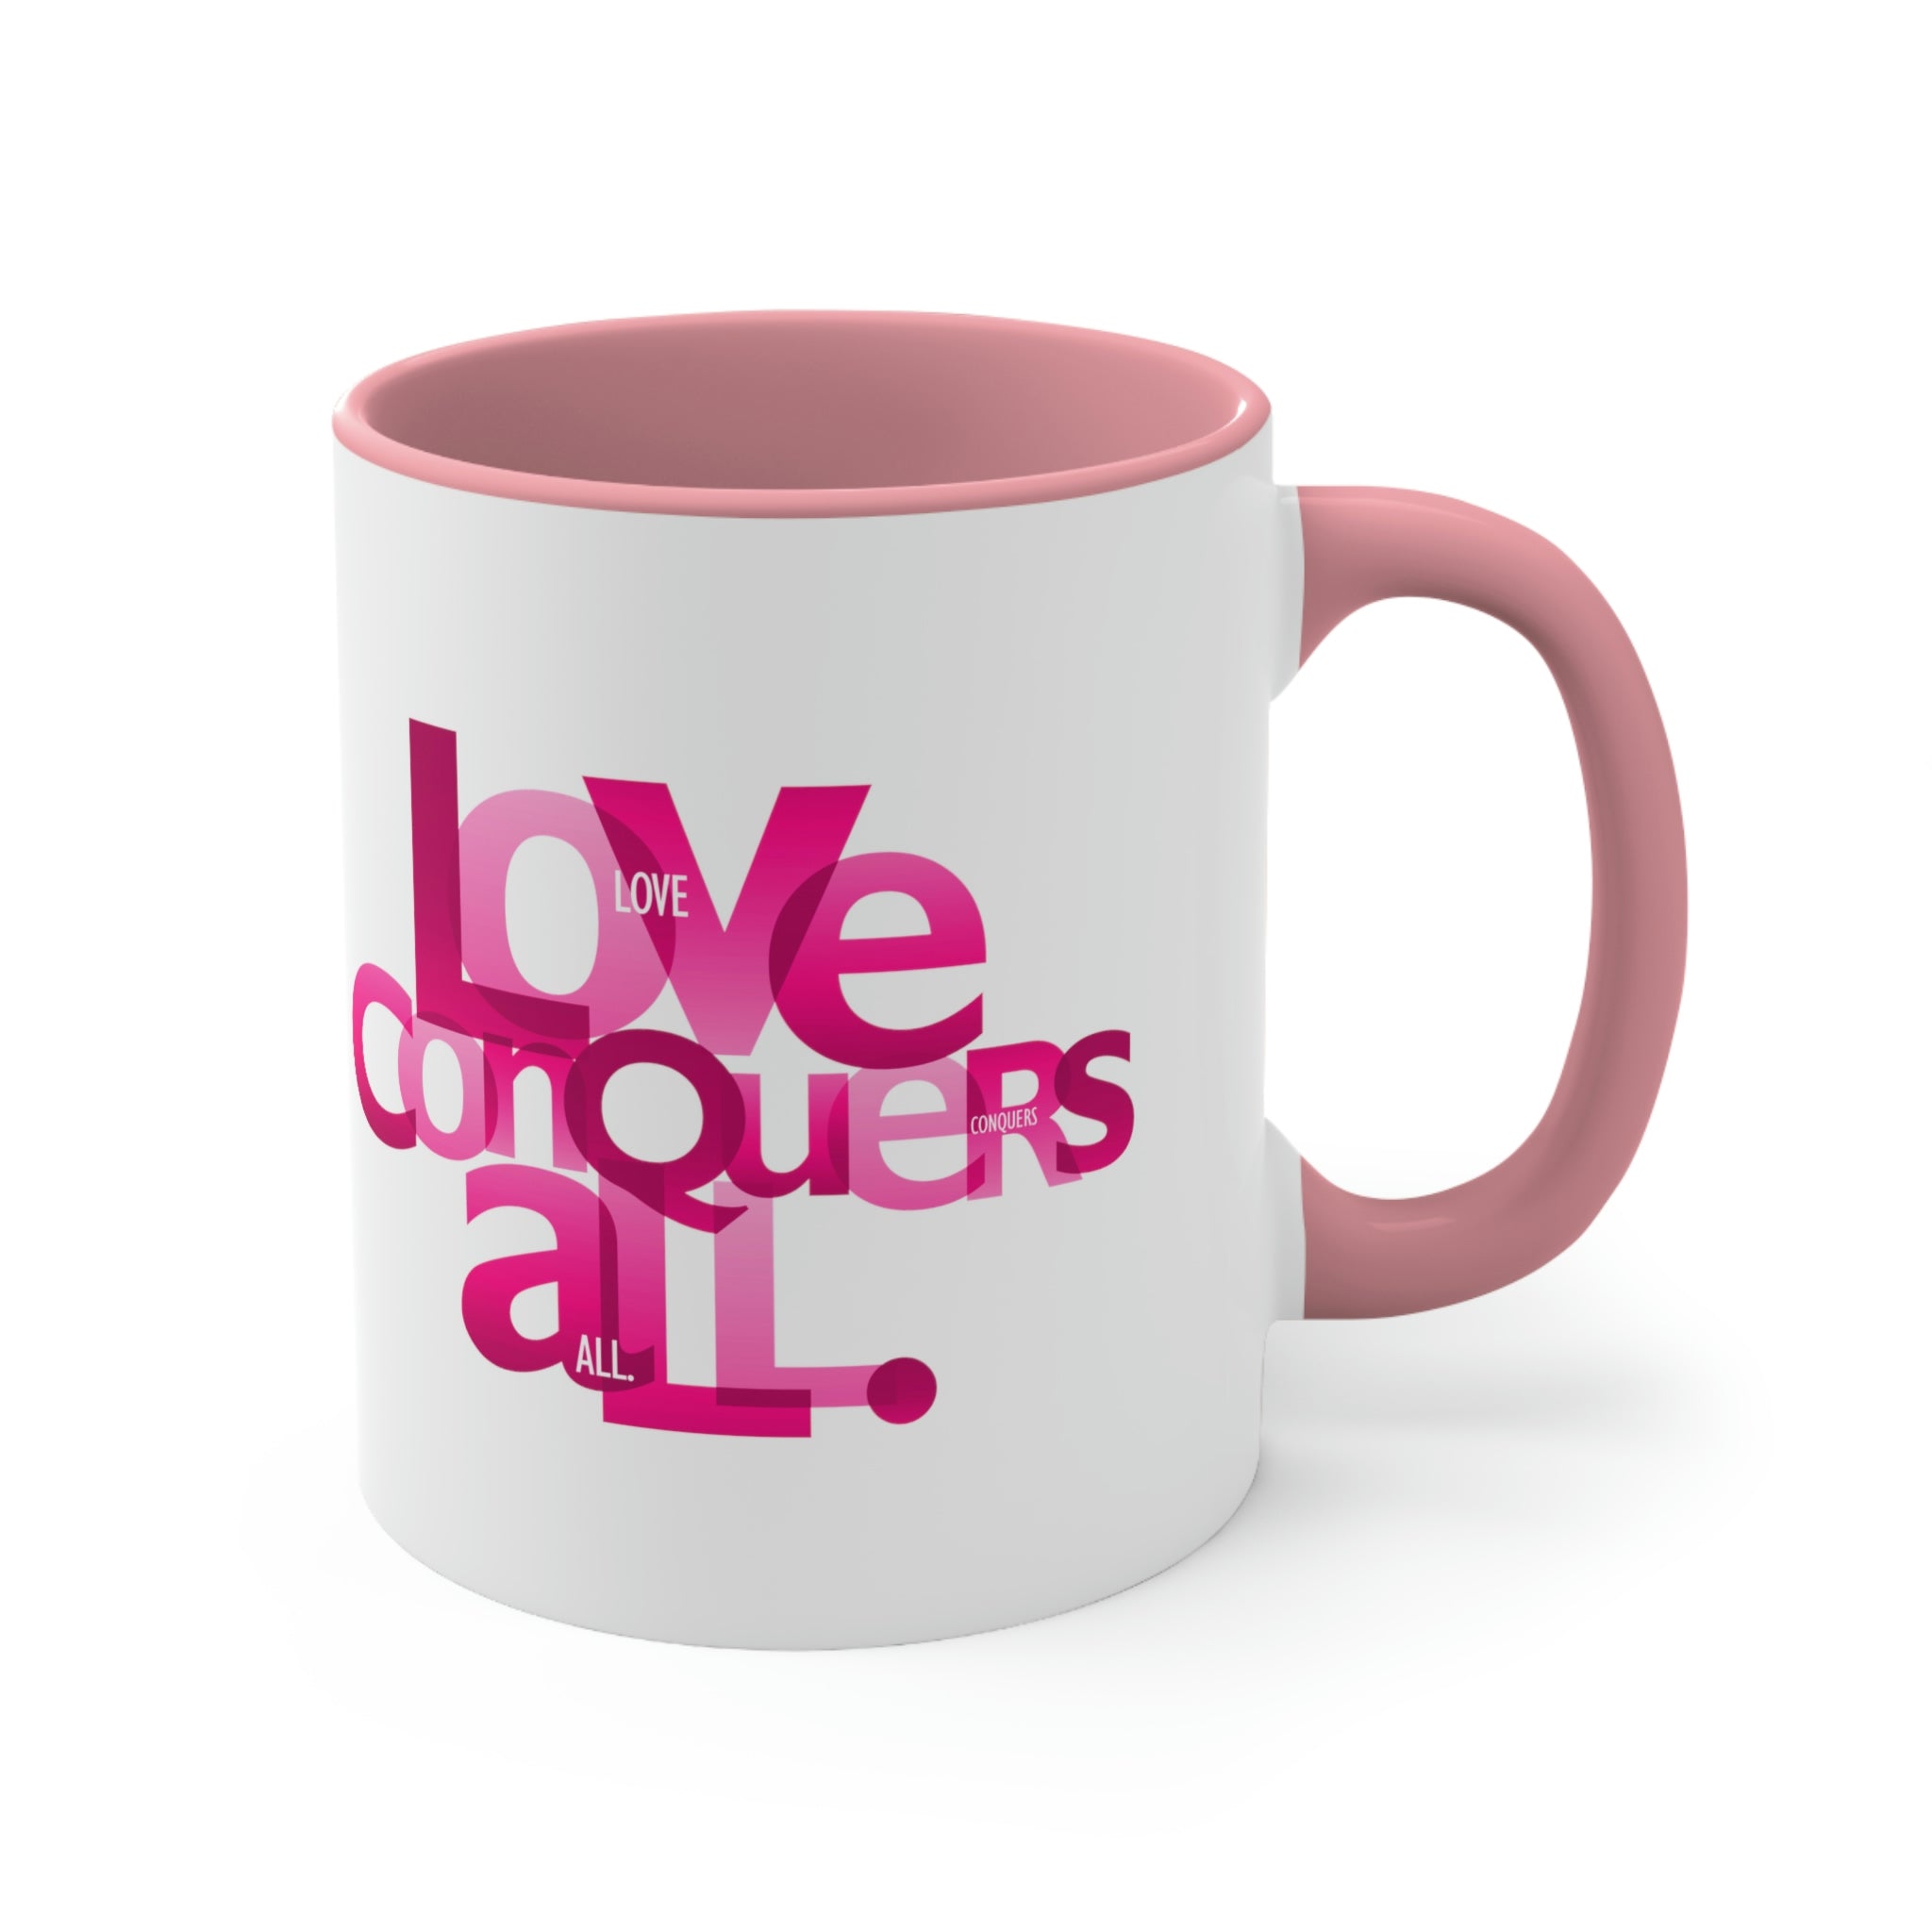 "Love Conquers All" in Pink -  Accent Coffee Mug, 11oz